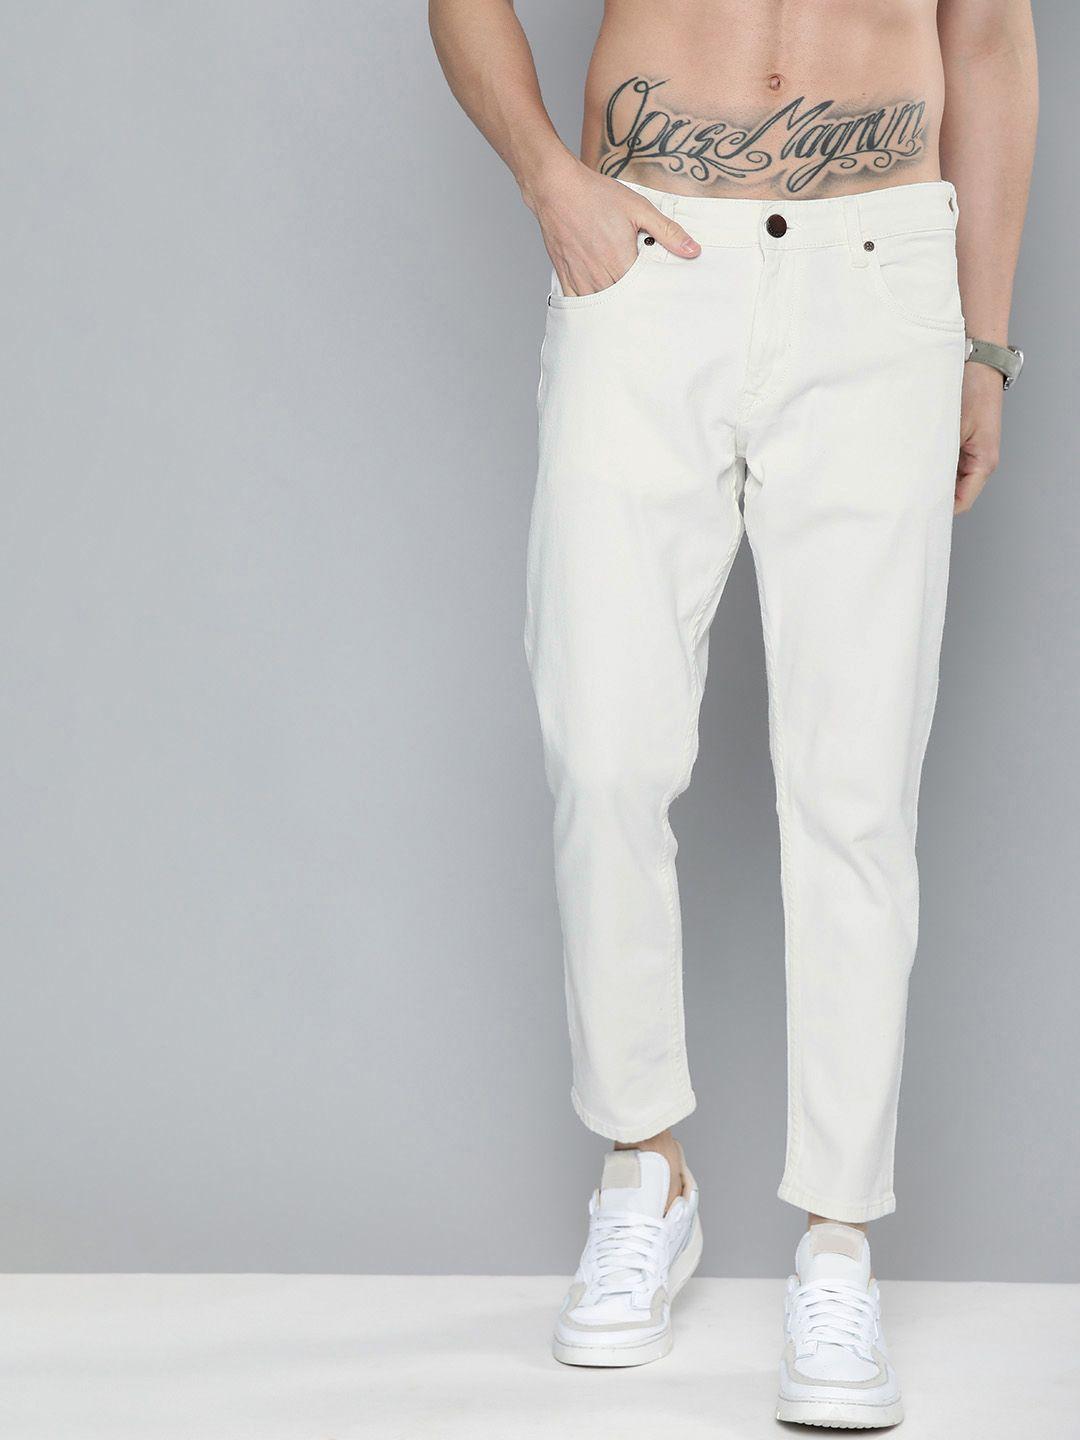 here&now-men-white-slim-tapered-fit-mid-rise-clean-look-stretchable-ankle-length-jeans